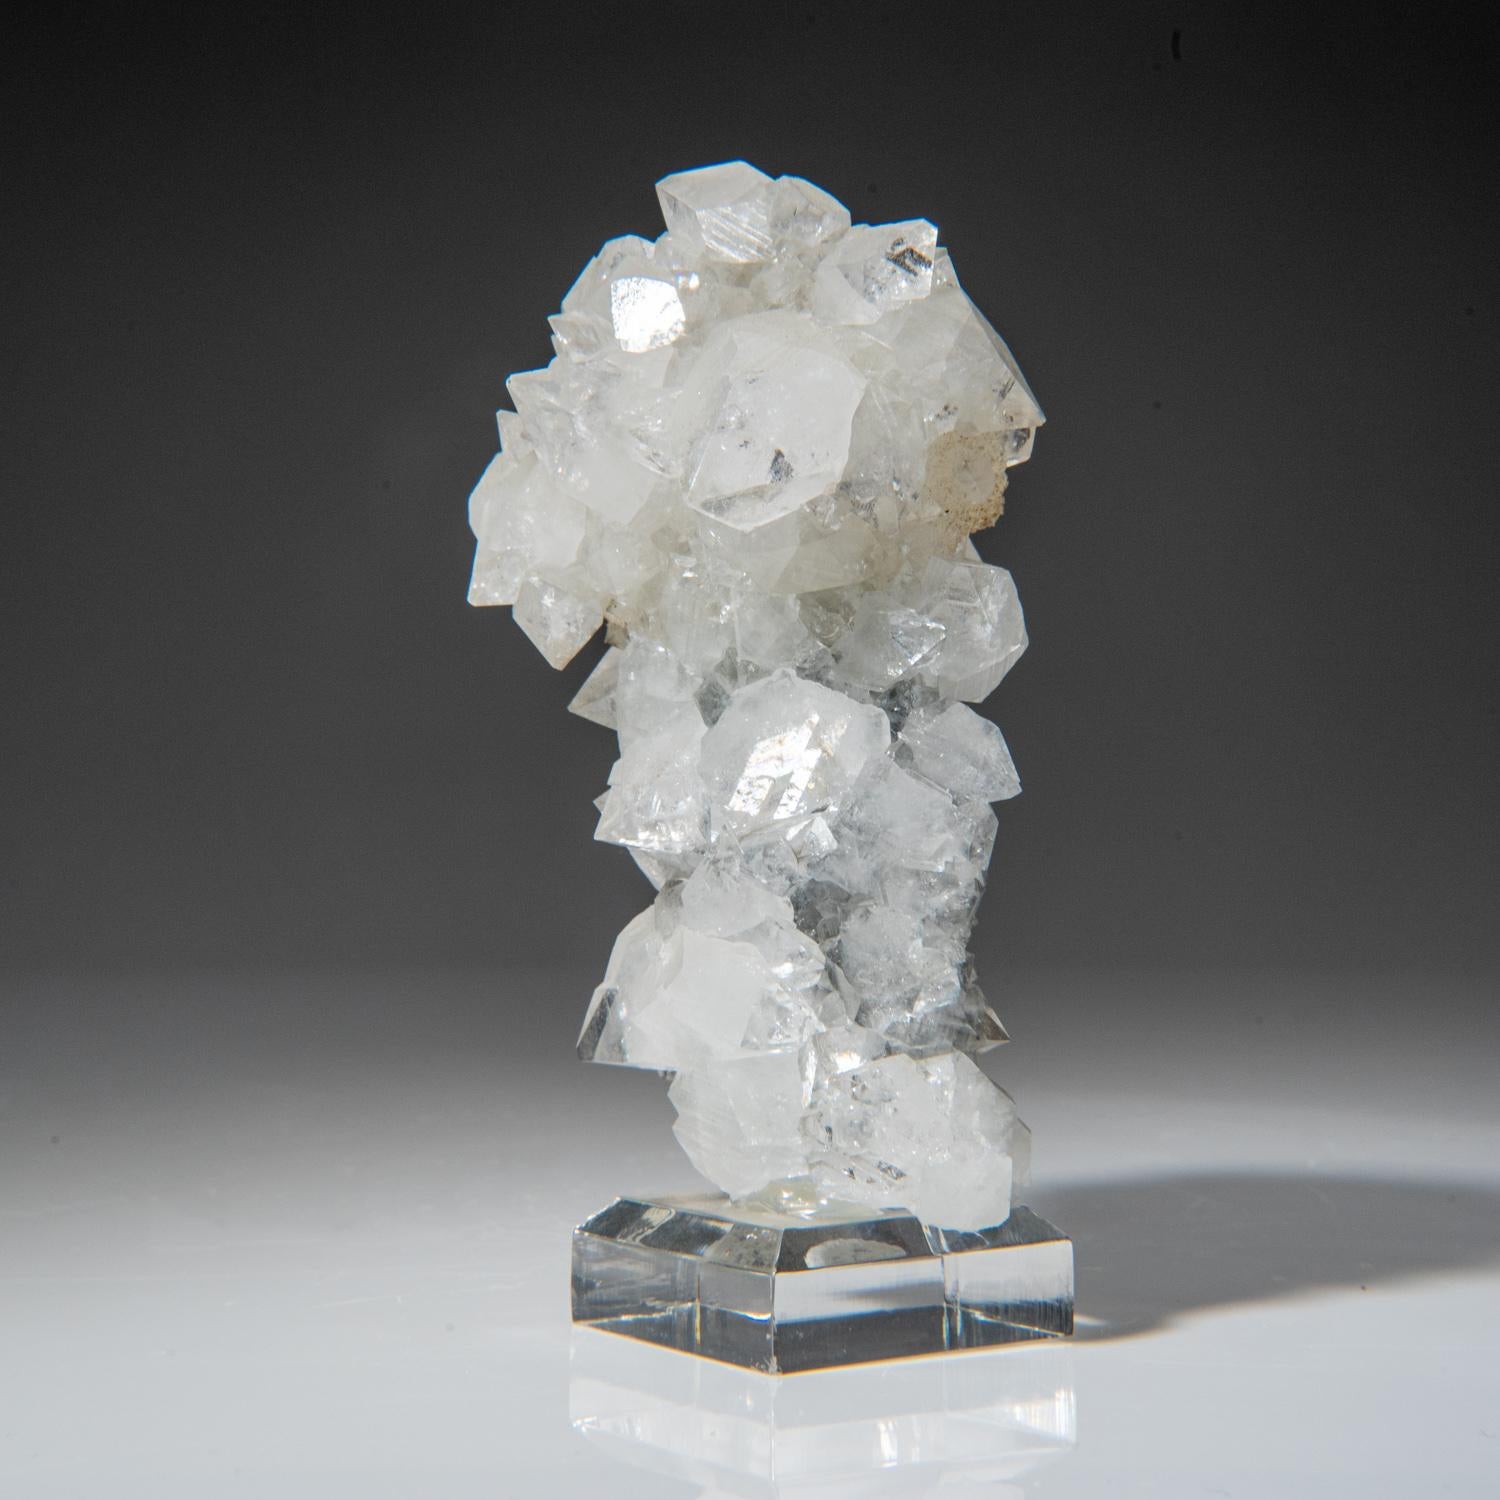 Pristine cluster of colorless apophyllite crystals. The crystals vary from milky white to water-clear at the terminations. this is a stalactitic formation crystallized all around over a central core.


Weight: 277.5 grams, Dimensions: 2 x 1.5 x 4